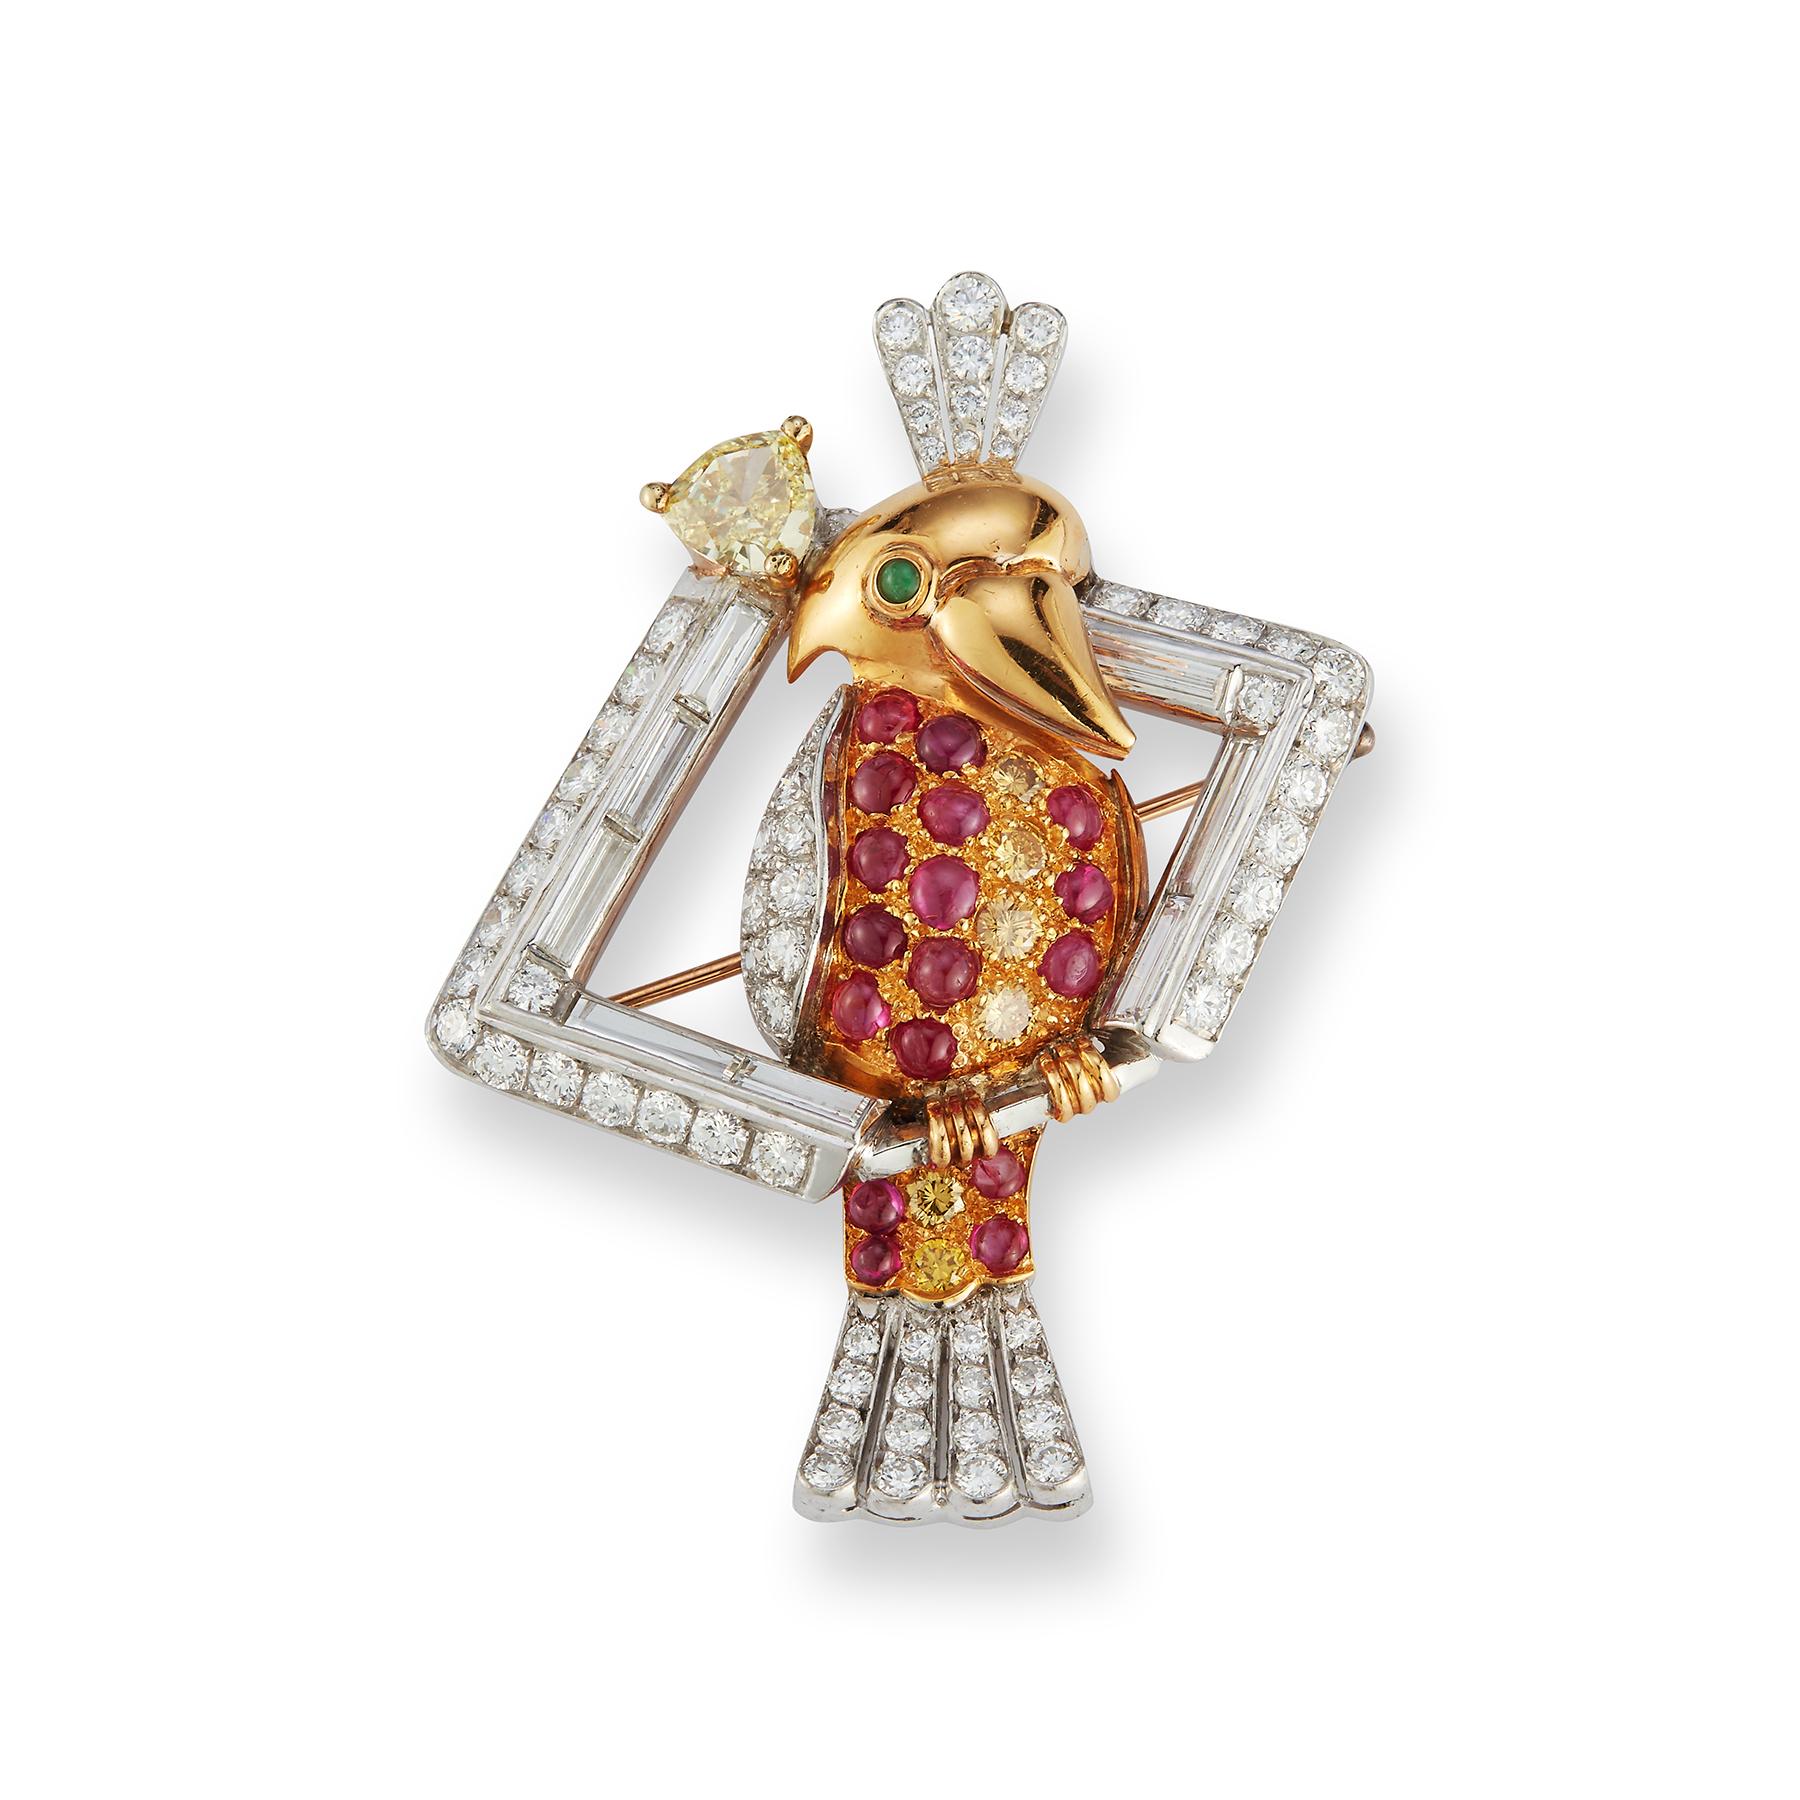 Diamond and Ruby Parrot Brooch with Emerald Eye with App 2.28 ct of Rubies, App. 03 ct Emerald, App 4.44 ct of Diamond set in 18k Yellow Gold and Platinum 
pear shape diamond with yellow tint is .77 ct